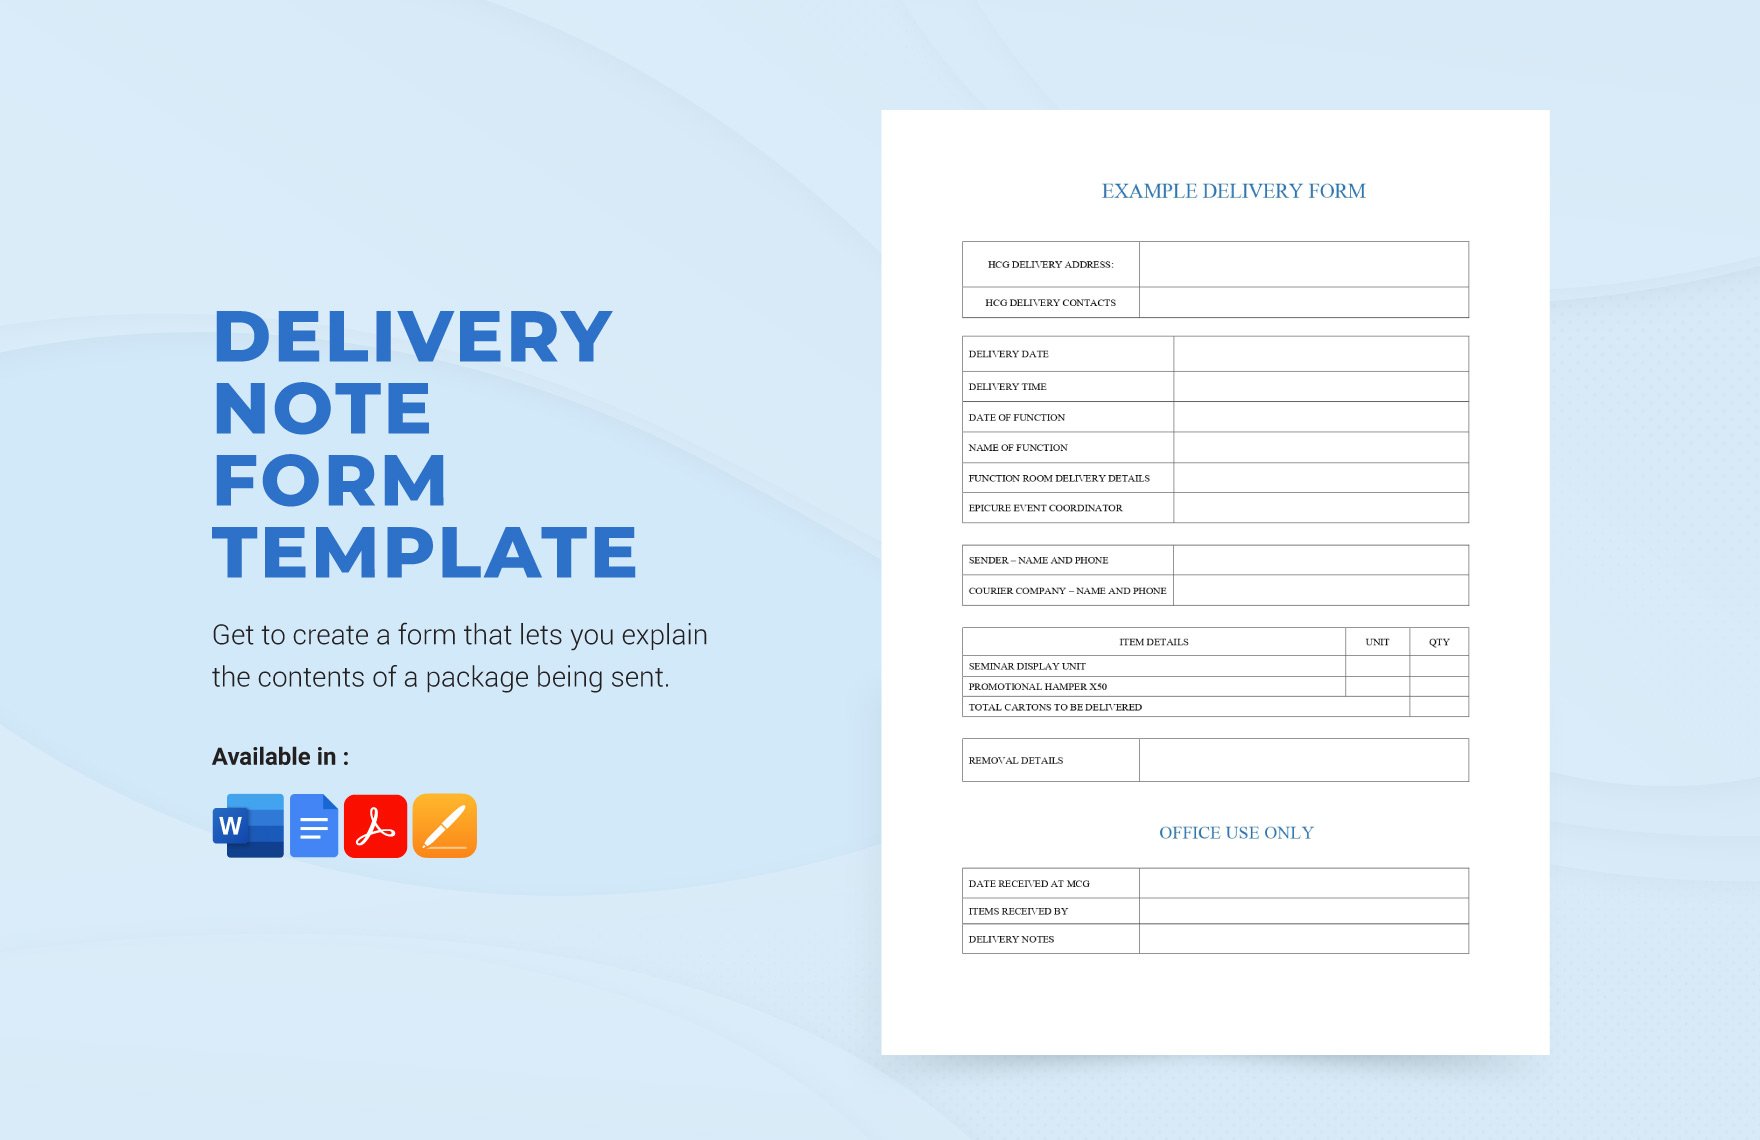 Delivery Note Form Template